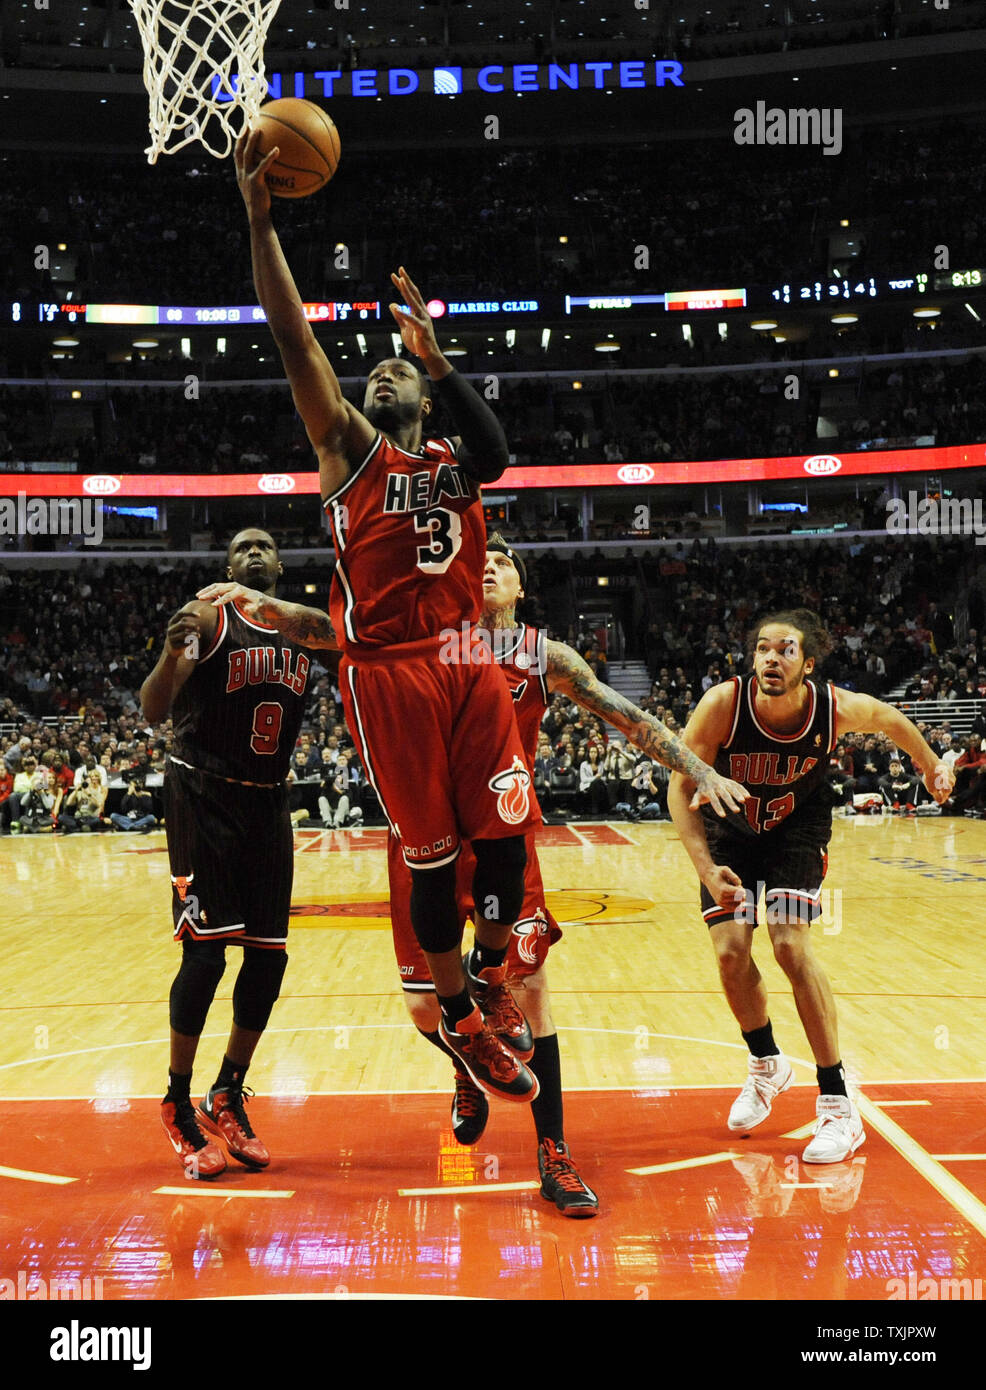 Miami Heat shooting guard Dwyane Wade (3) shoots past Chicago Bulls small forward Luol Deng (9) during the second half at the United Center in Chicago on February 21, 2013.     UPI/David Banks Stock Photo